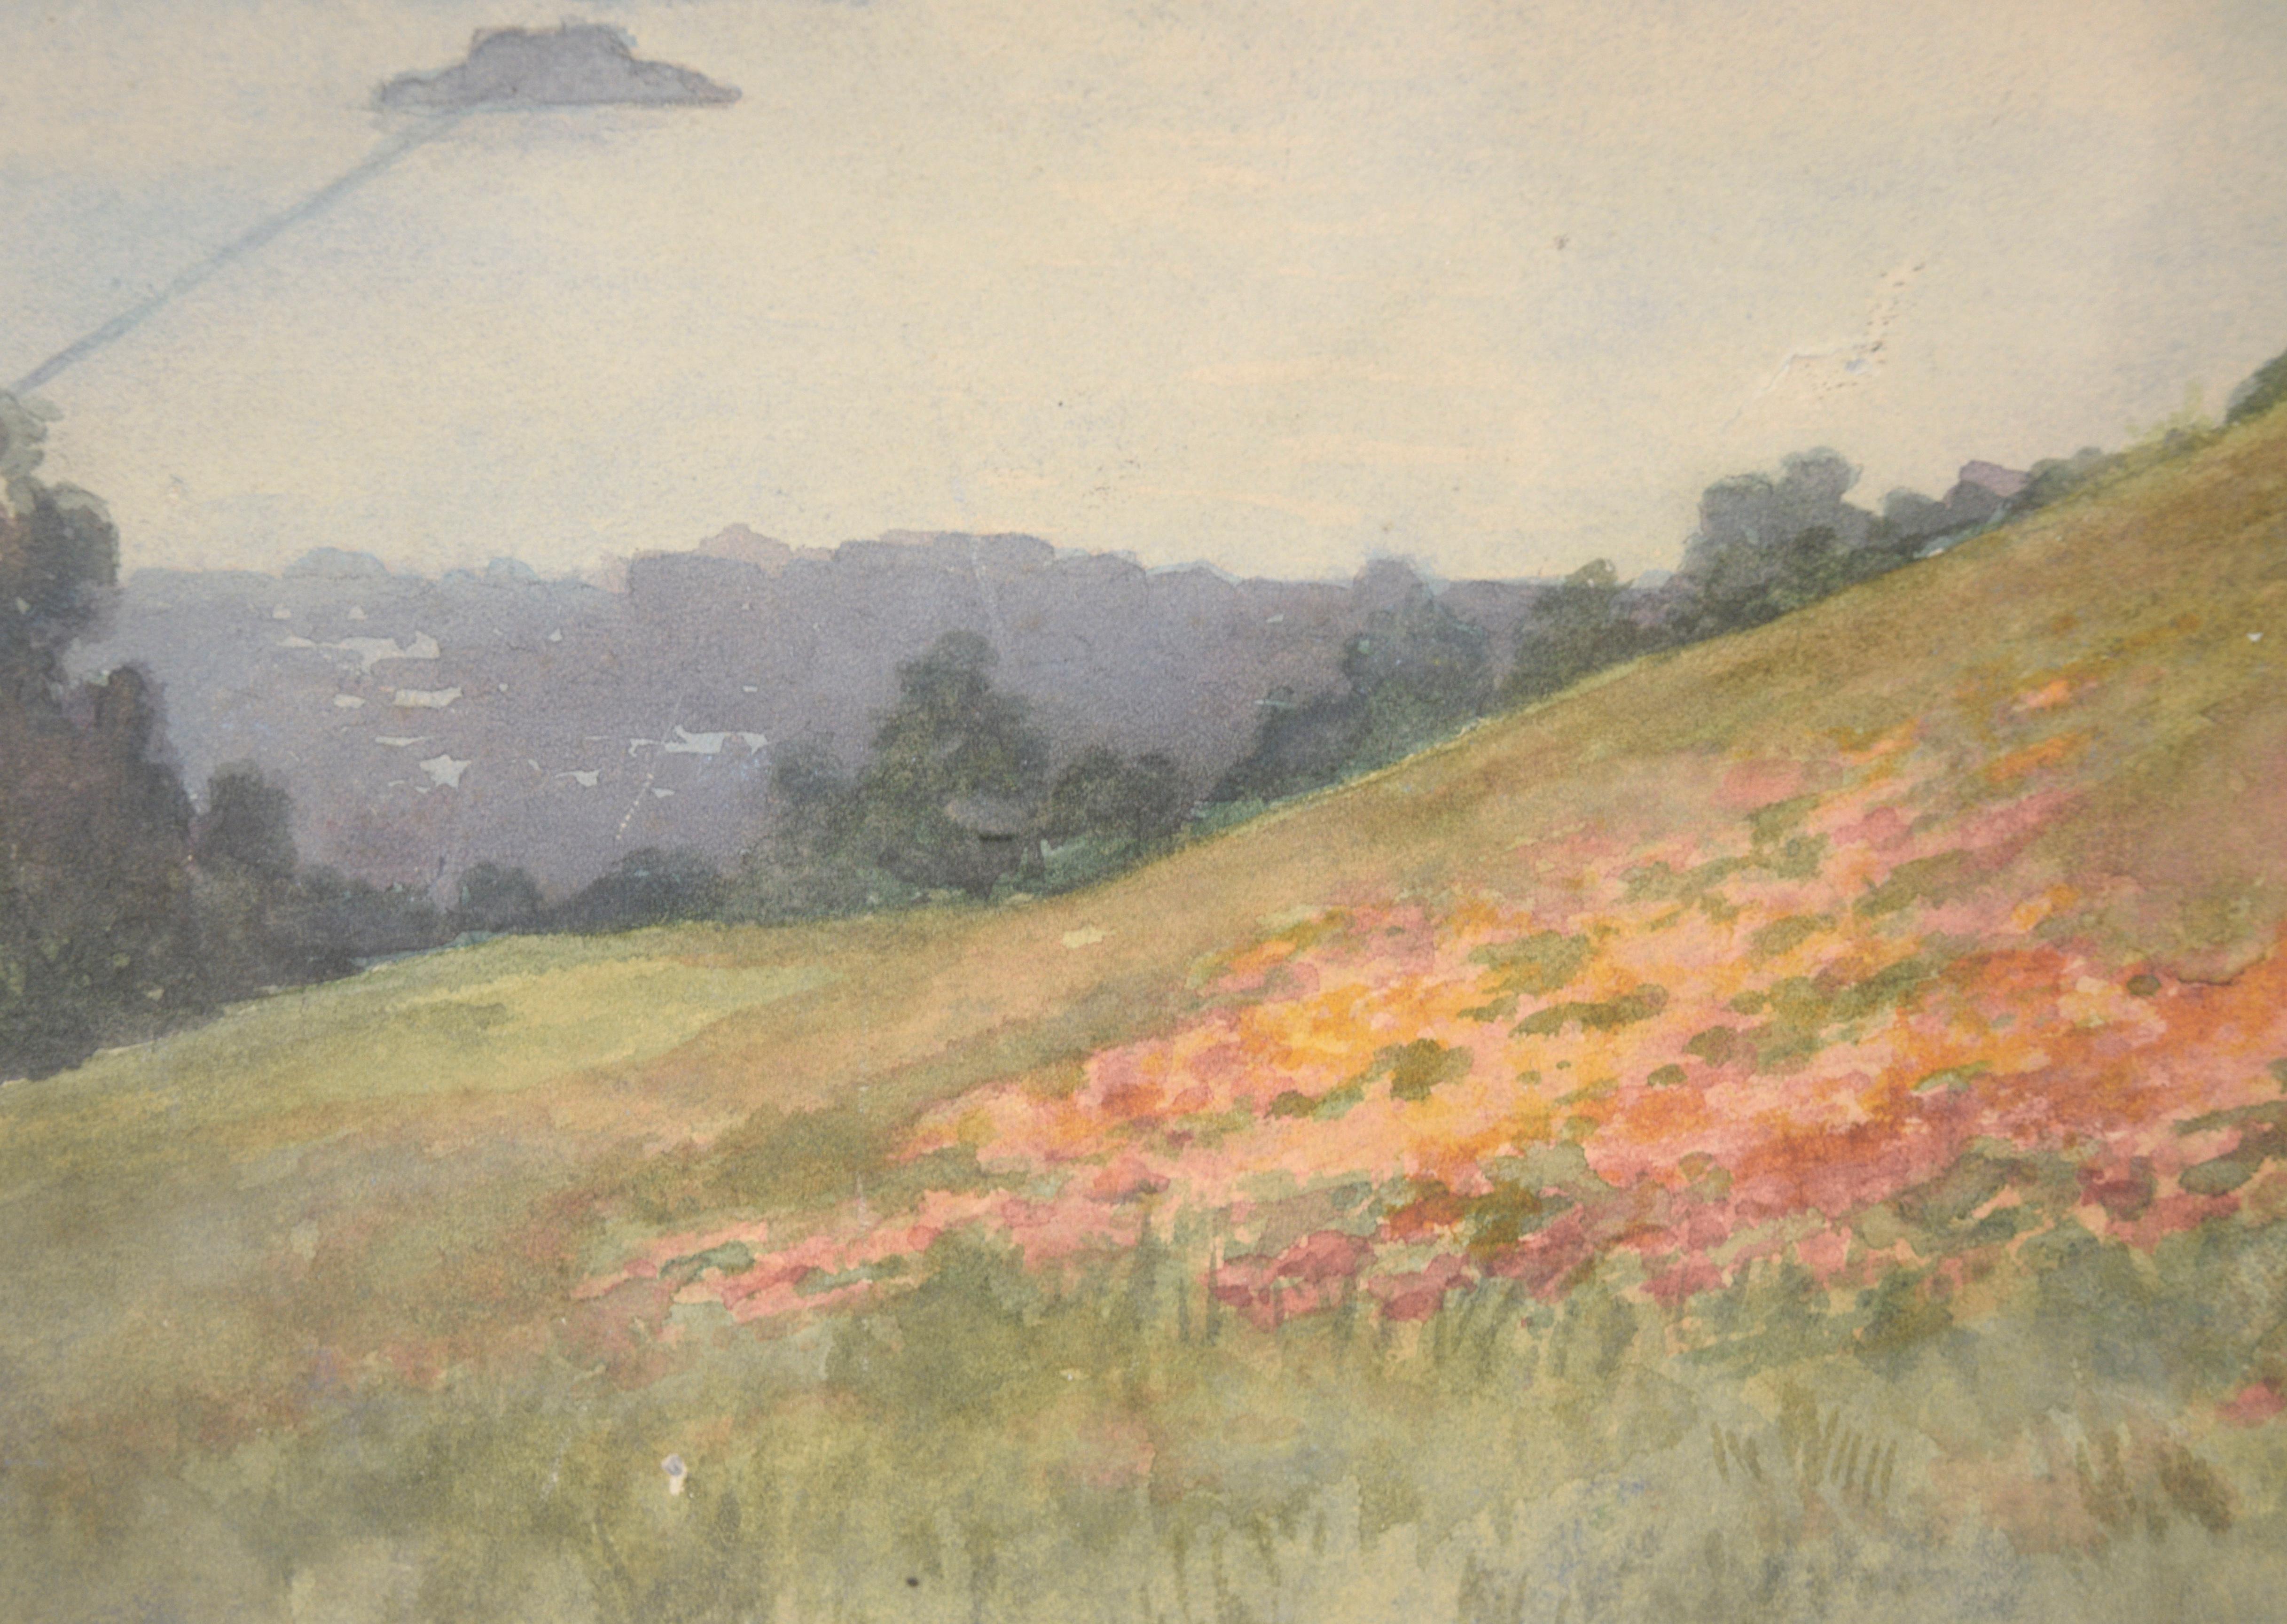 Serene watercolor by an unknown artist (20th Century), in the style of Elmer Wachtel (American, 1864 - 1929). This mid-century landscape watercolor shows a beautiful sweeping view of the coast, with a grassy hillside dotted with wildflowers in the